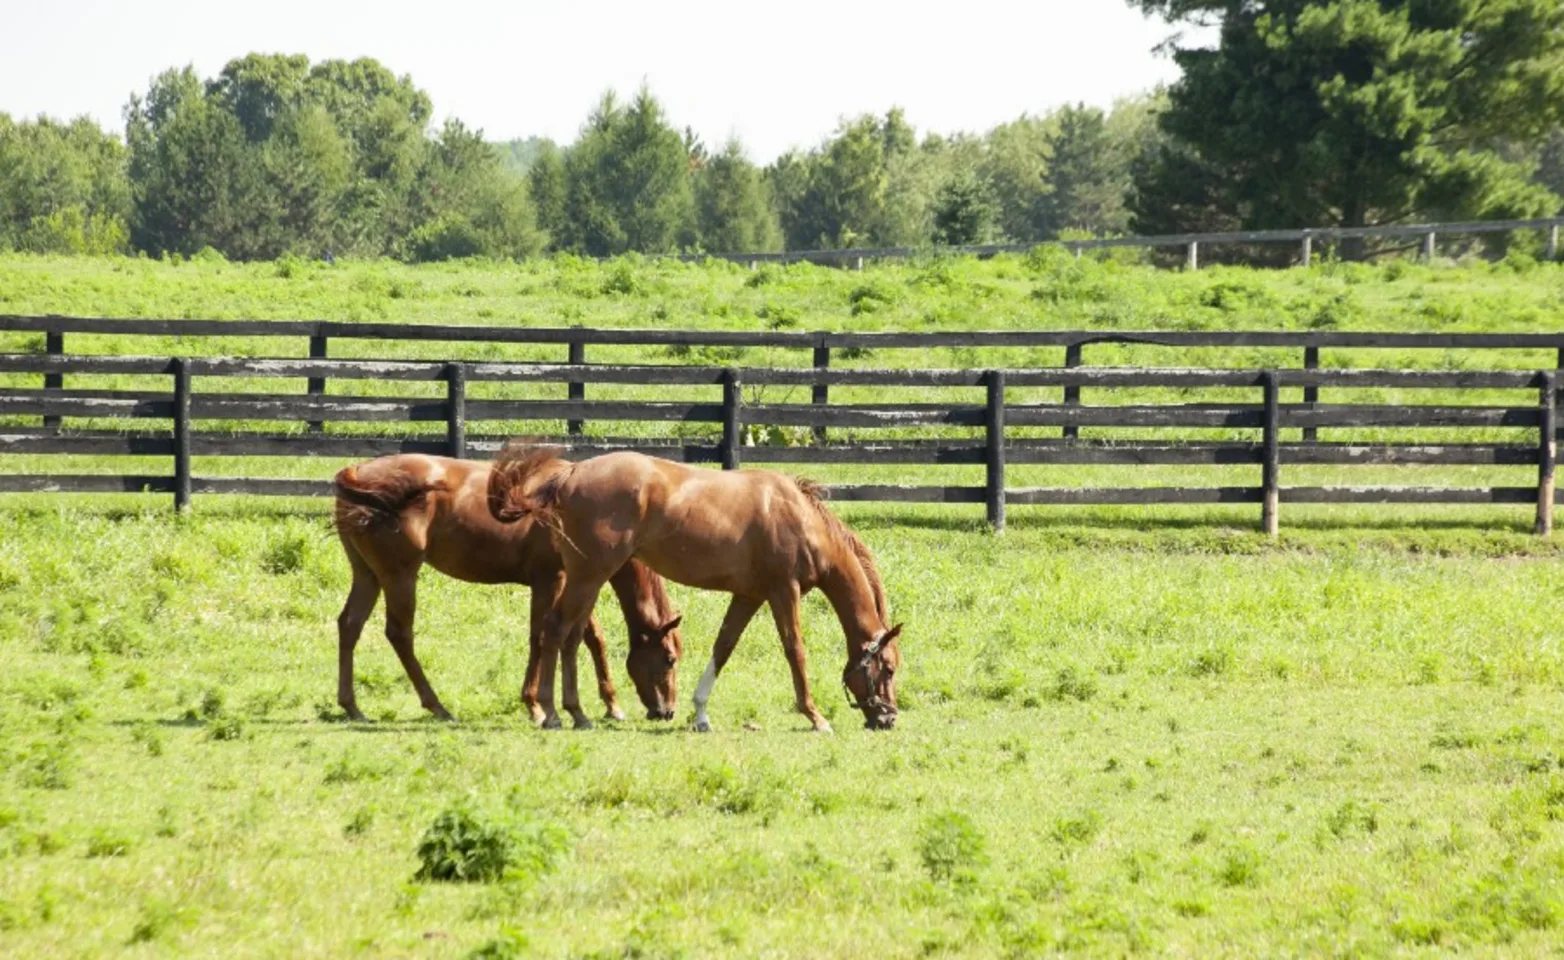 2 brown horses grazing in an enclosed grass field